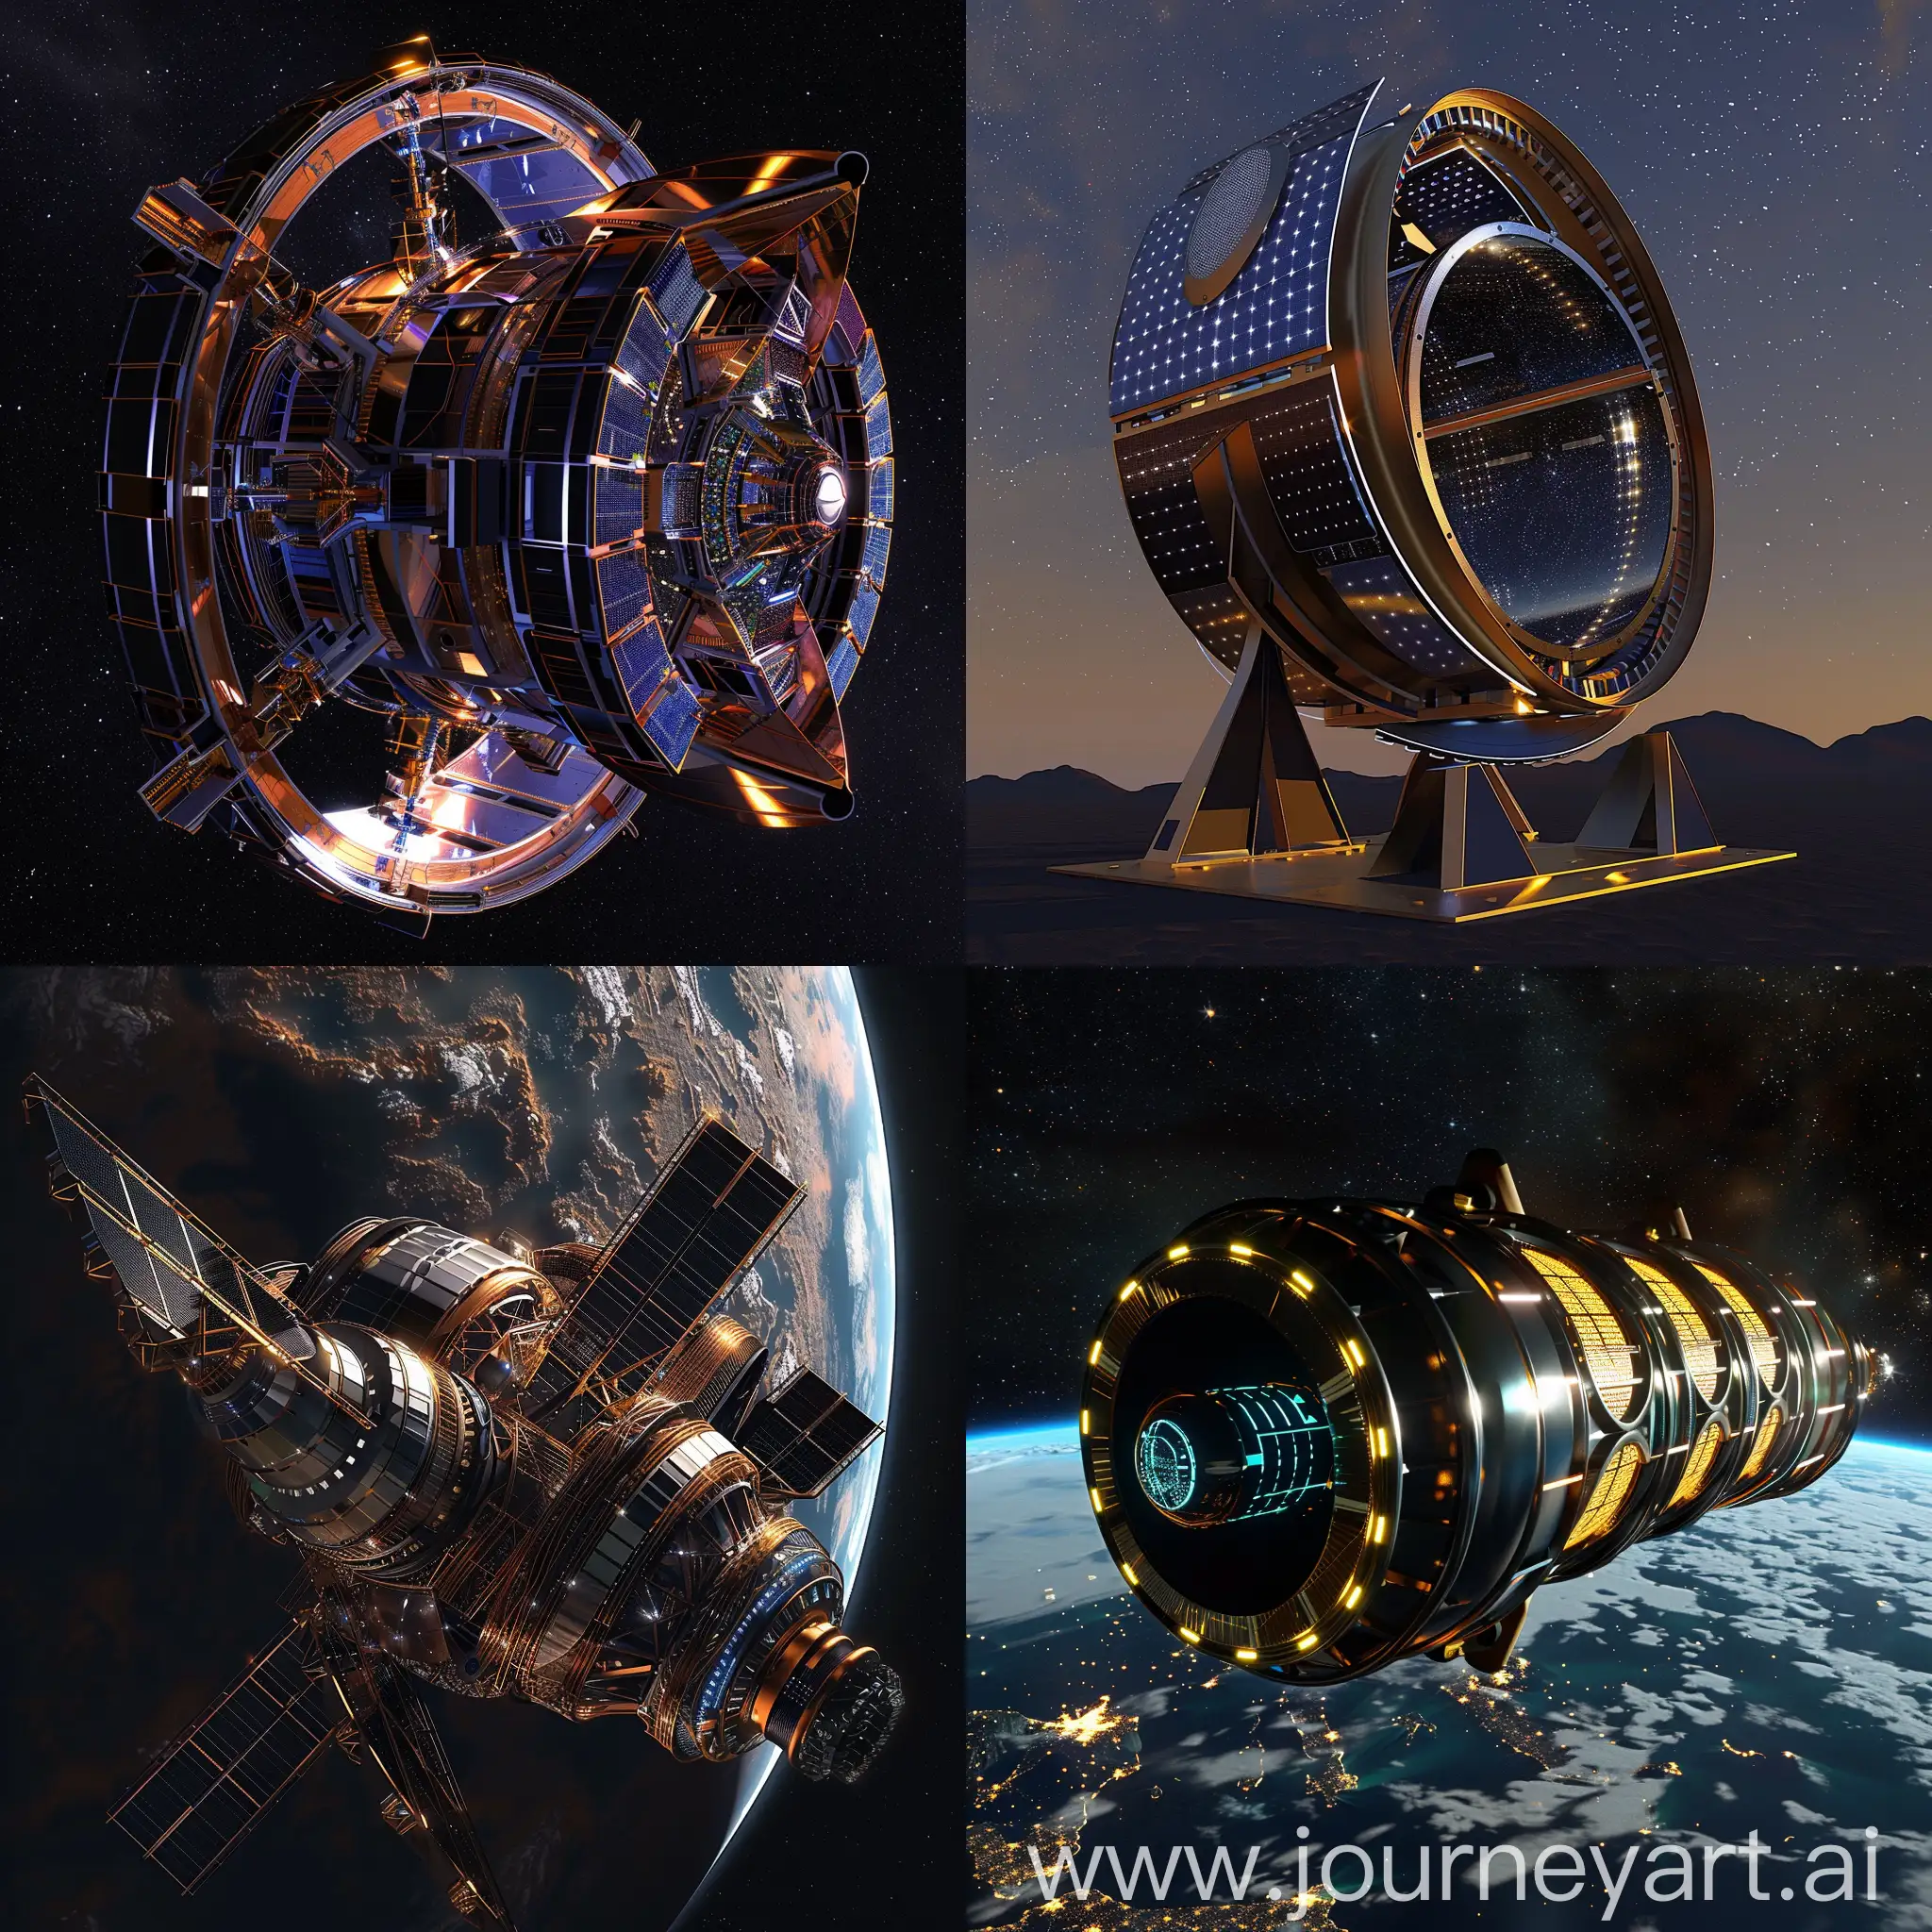 Sci-Fi space telescope, Advanced Science and Technology, Modular Construction (Sectional Disks), Organic, Streamlined Tubing, Integrated Holographic Displays, Biometric User Interface, Self-Healing Materials, Artificial Intelligence Core, Nanotech-Based Components, Kinetic Cooling System, Advanced Power Generation, Dynamic Lighting System, Self-Deploying Structures, Aerodynamic Solar Sails, Adaptive Mirror Segments, Metamaterial Hull, Quantum Communication Arrays, AI-Enhanced Surface, 3D-Printed Exoskeleton, Holographic Projectors, Kinetic Energy Harvesters, Interactive Data Visualization Interfaces, In Unreal Engine 5 Style --stylize 1000